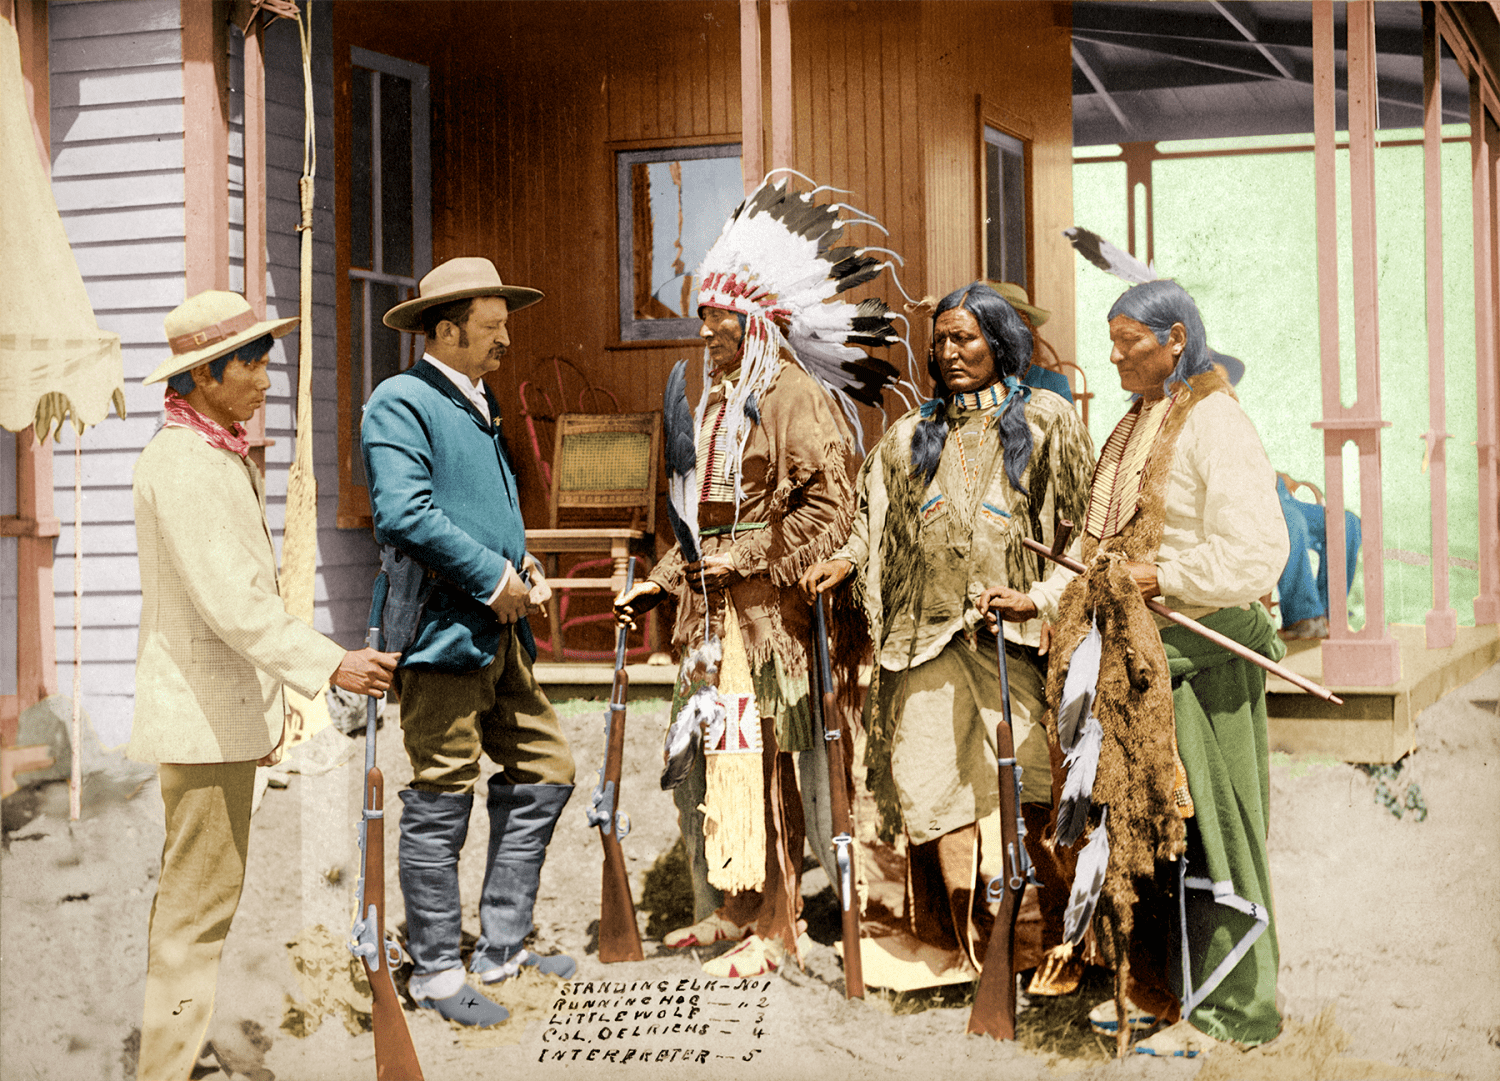 [colorized] Chief Standing Elk, Running Hog, and Little Wolf talk to Colonel Oelrichs & an Interpreter, July 4th 1887 (orig. photo by John C.H. Grabill, colorization by John Guntzelman)